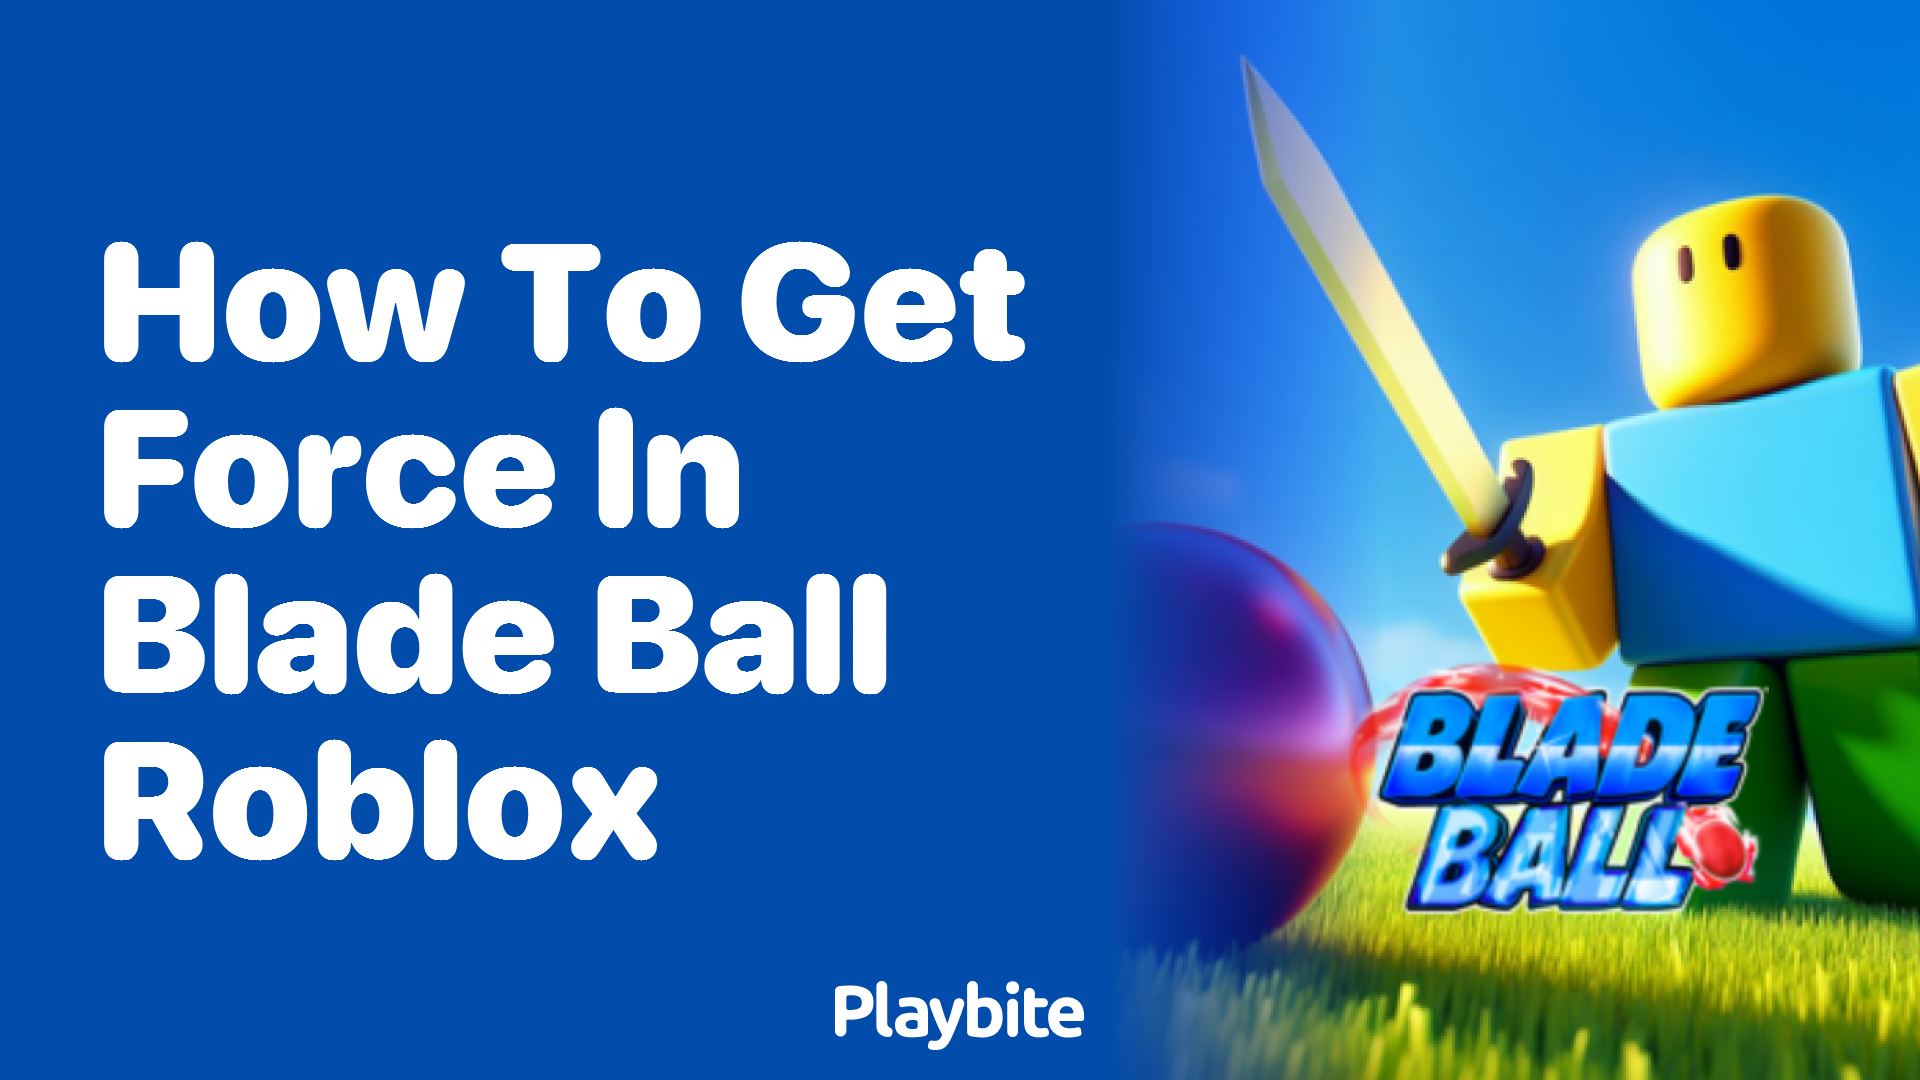 How to Get Force in Blade Ball Roblox